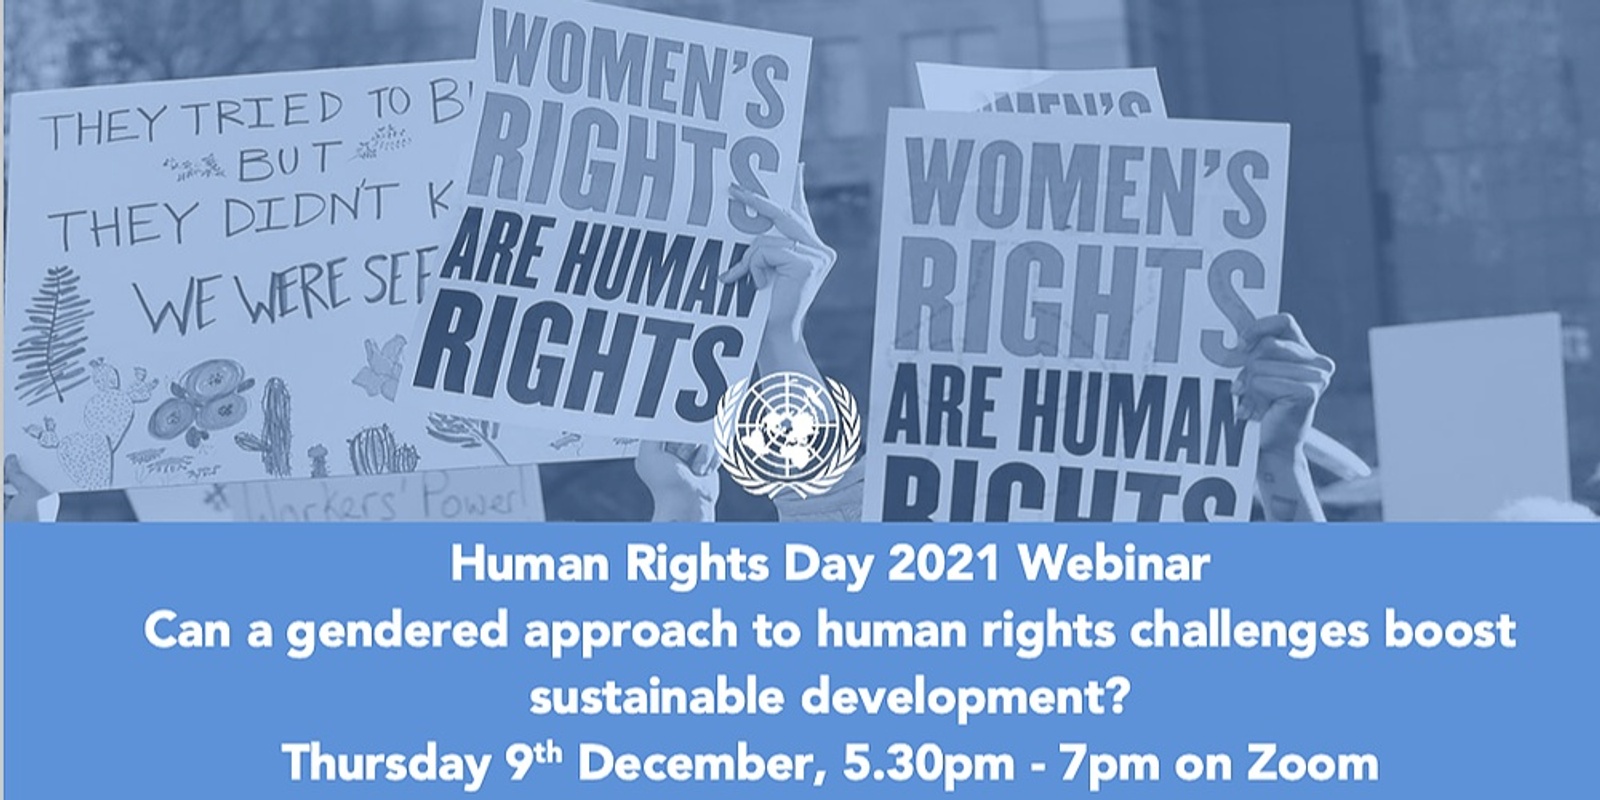 Human Rights Day 2021 Webinar: Can a gendered approach to human rights challenges boost sustainable development?